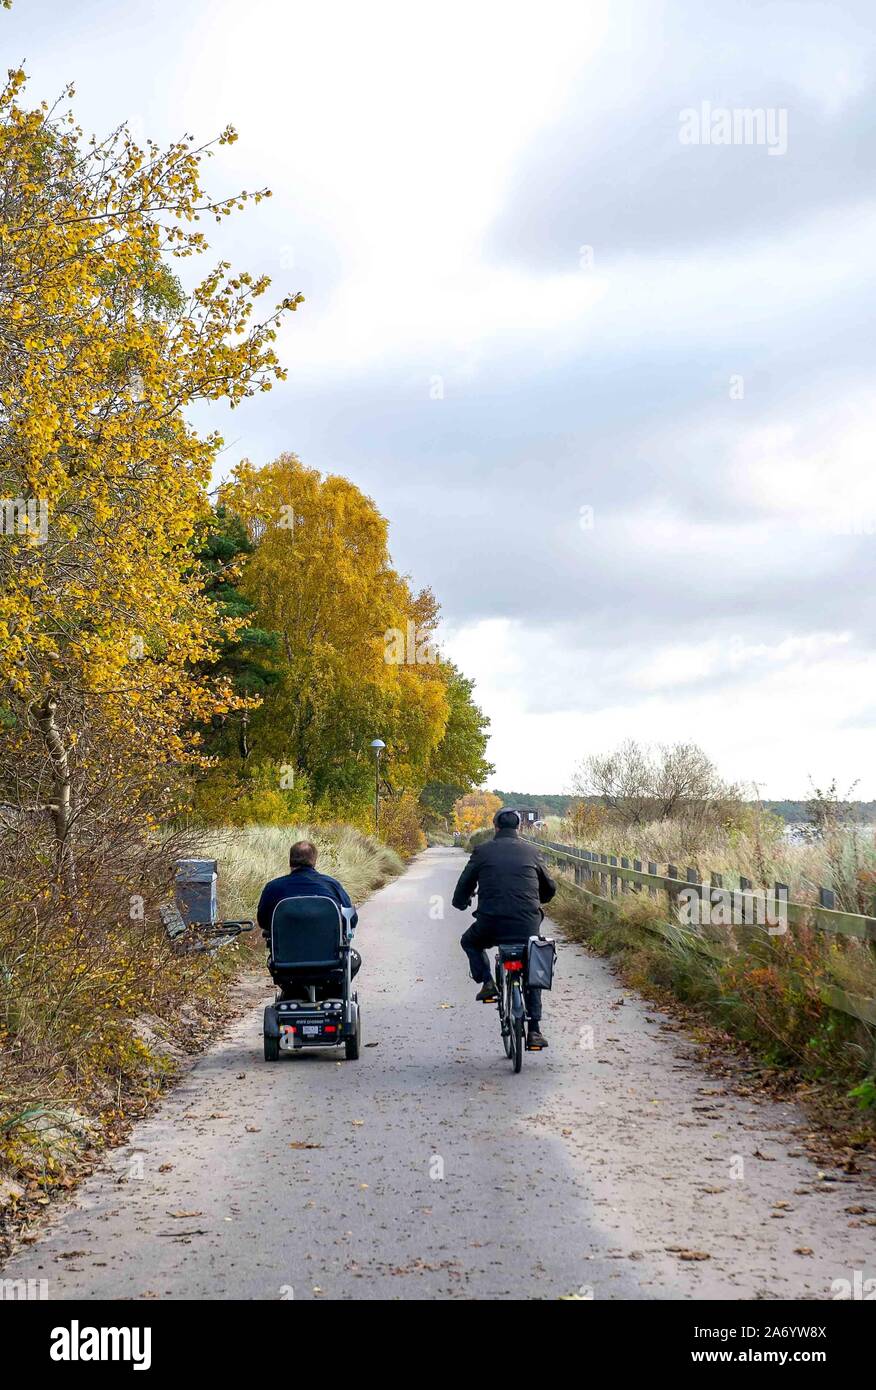 Two friends ride side-by-side, one on a bicycle and one on a mobility scooter, on the paved path along the seaside in Ystad, Sweden. Stock Photo